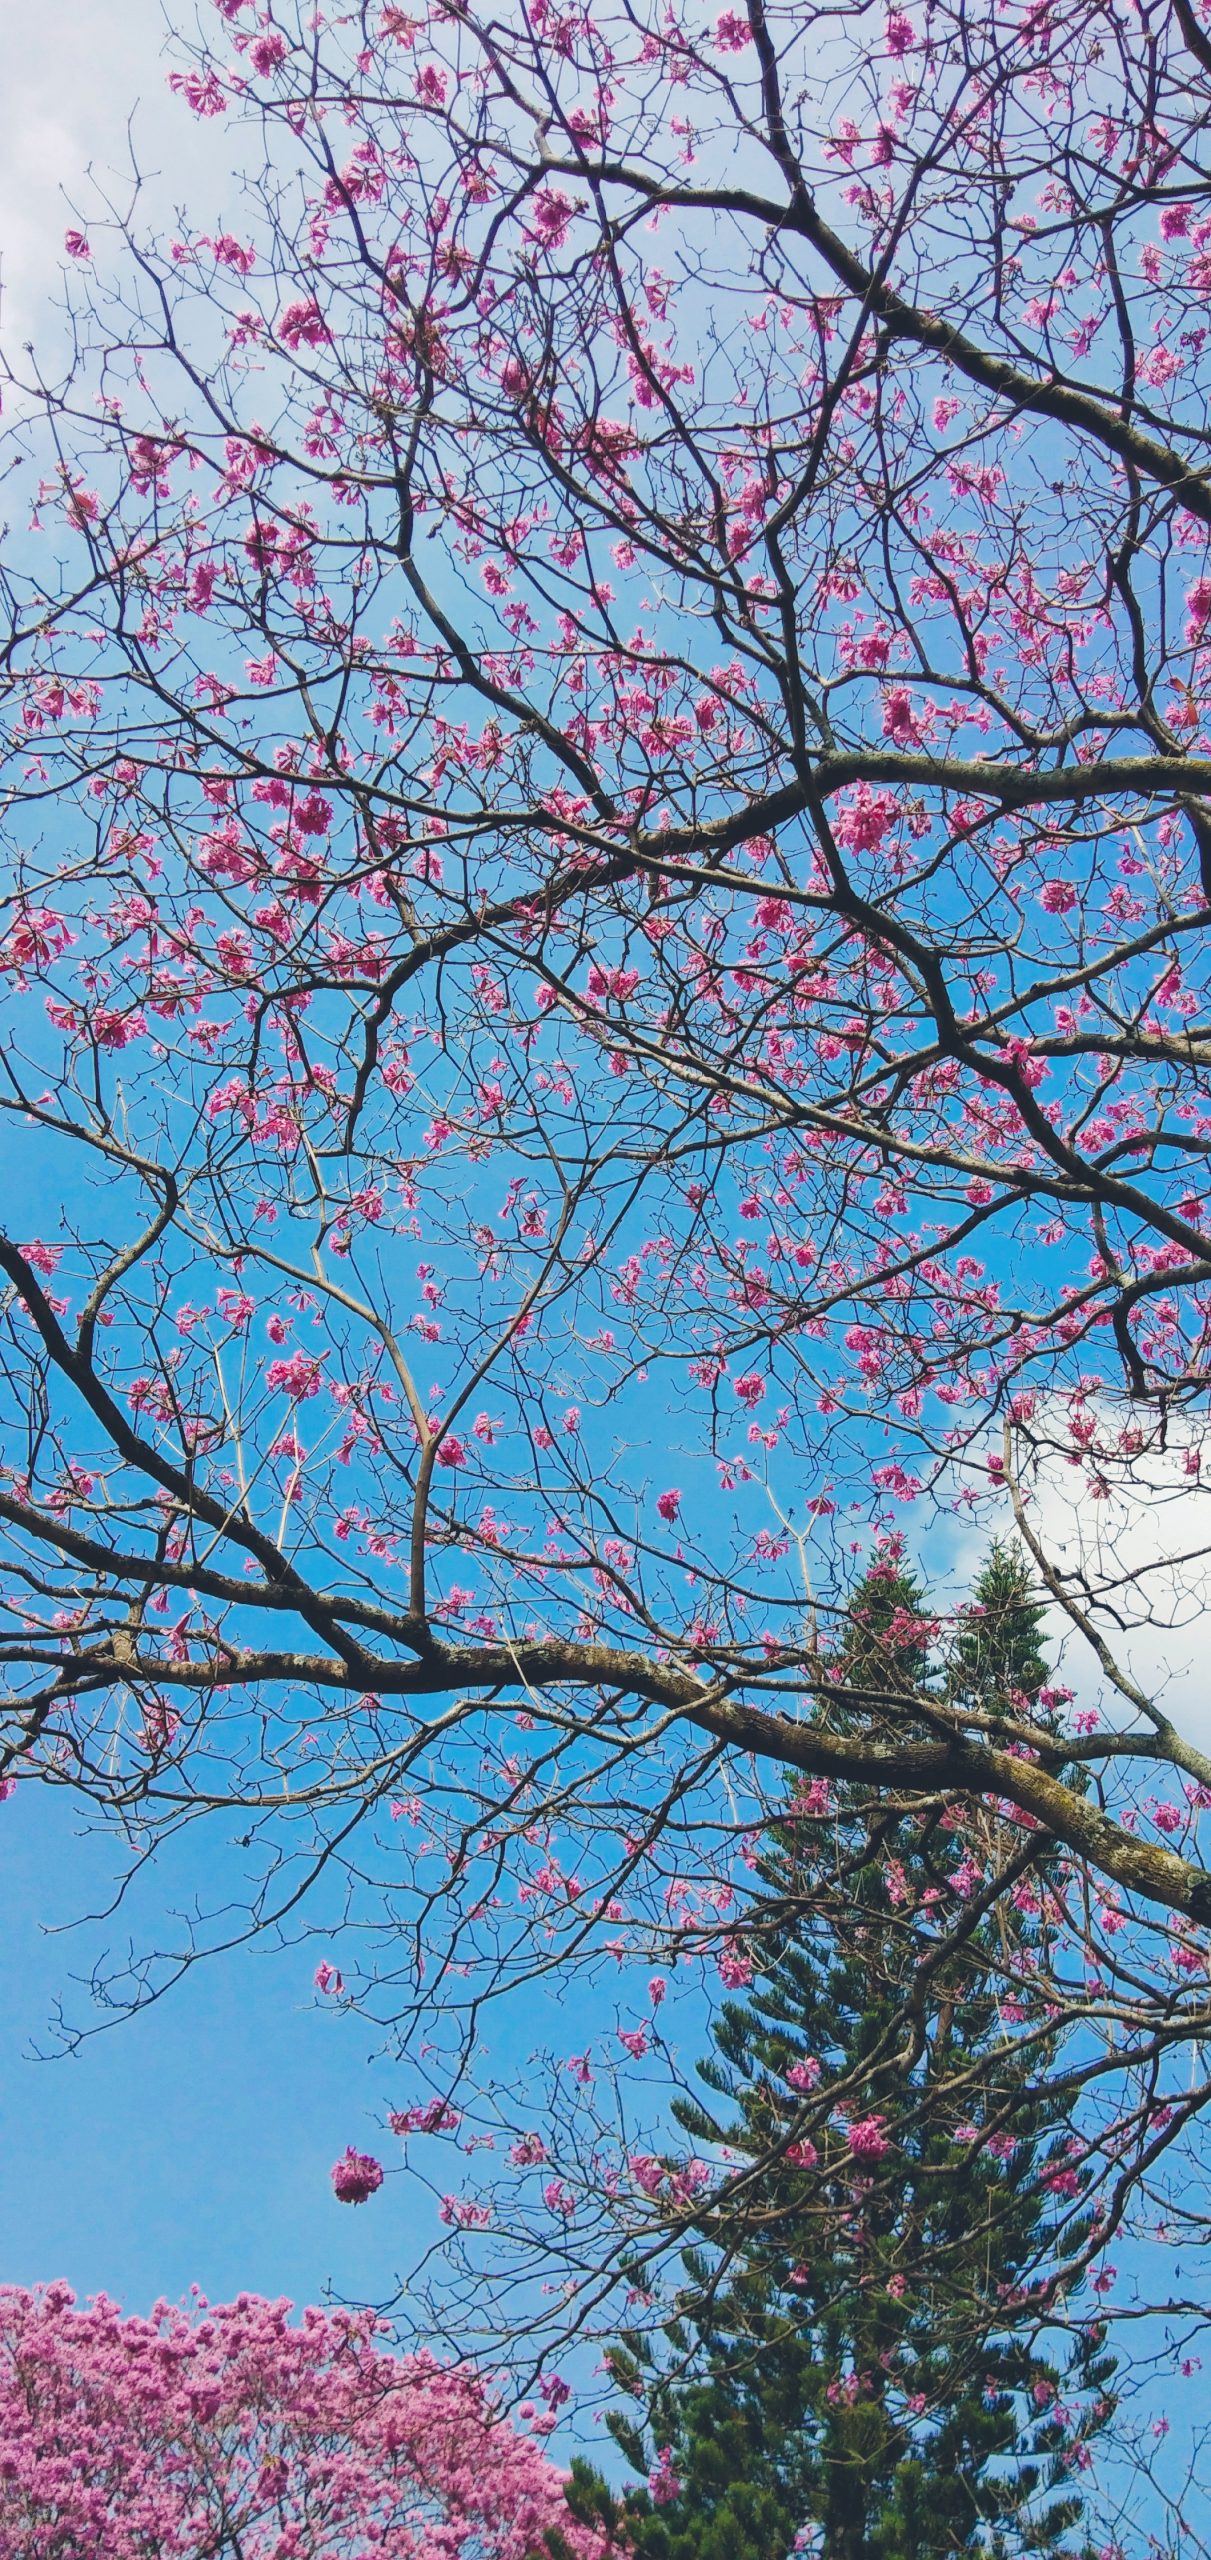 Tree with flowers